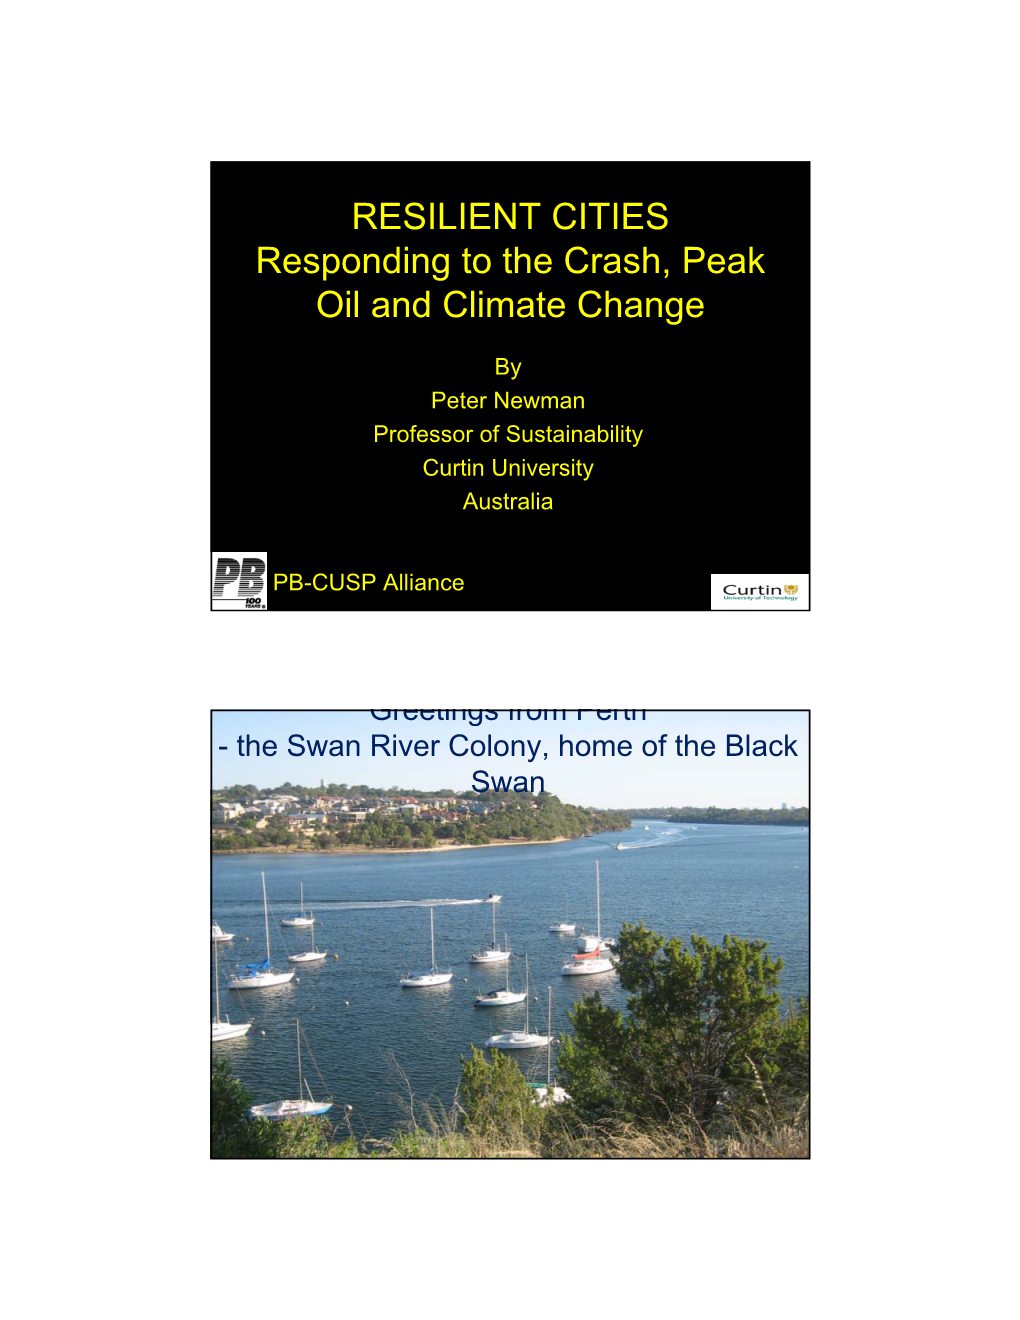 RESILIENT CITIES Responding to the Crash, Peak Oil and Climate Change